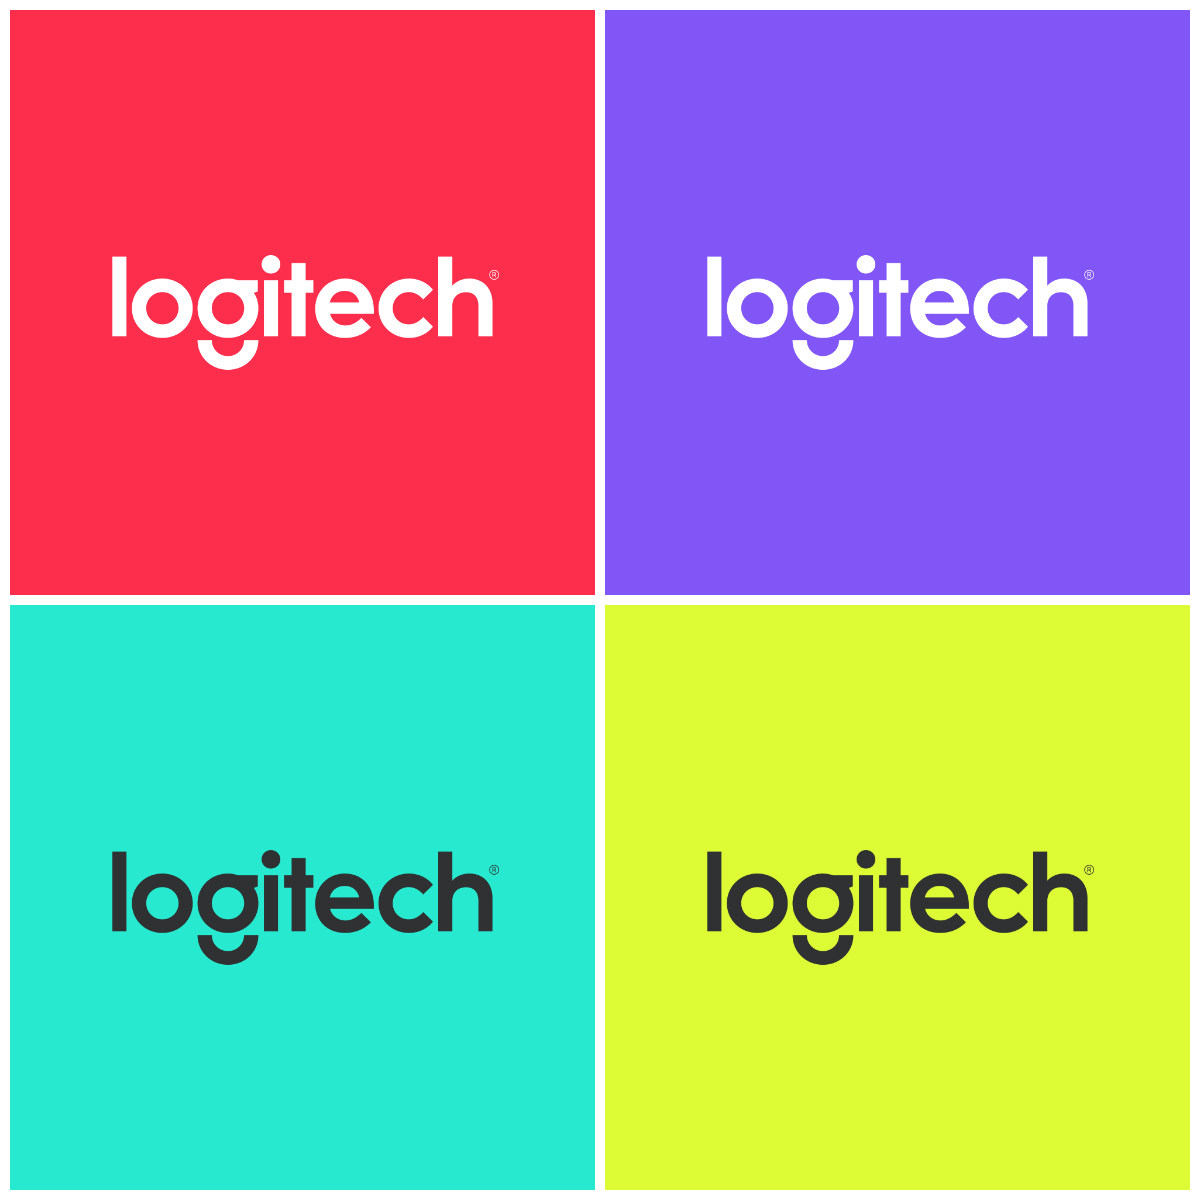 Logitech Is Changing Its Name To ‘Logi’ Because Tech Means Nothing